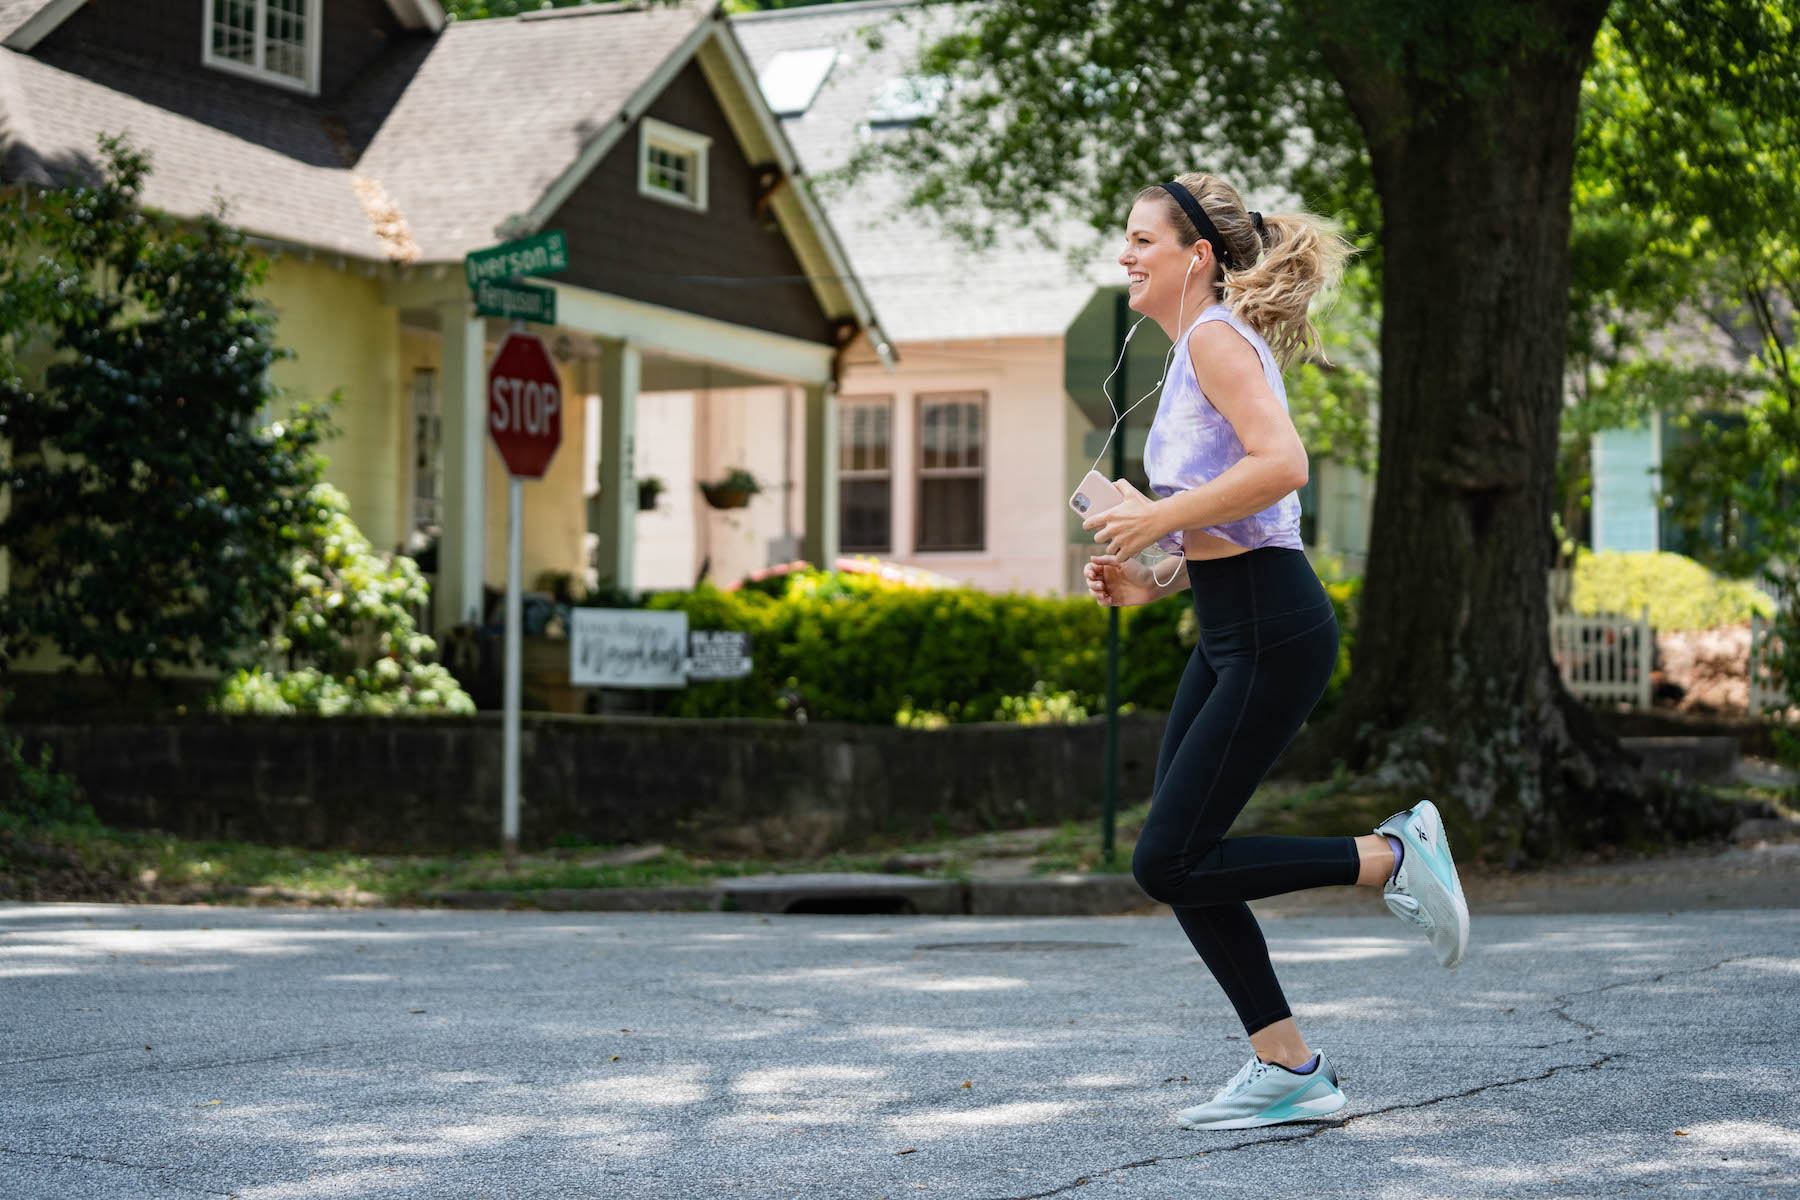 Avoid These 6 Activities Before Going For A Run